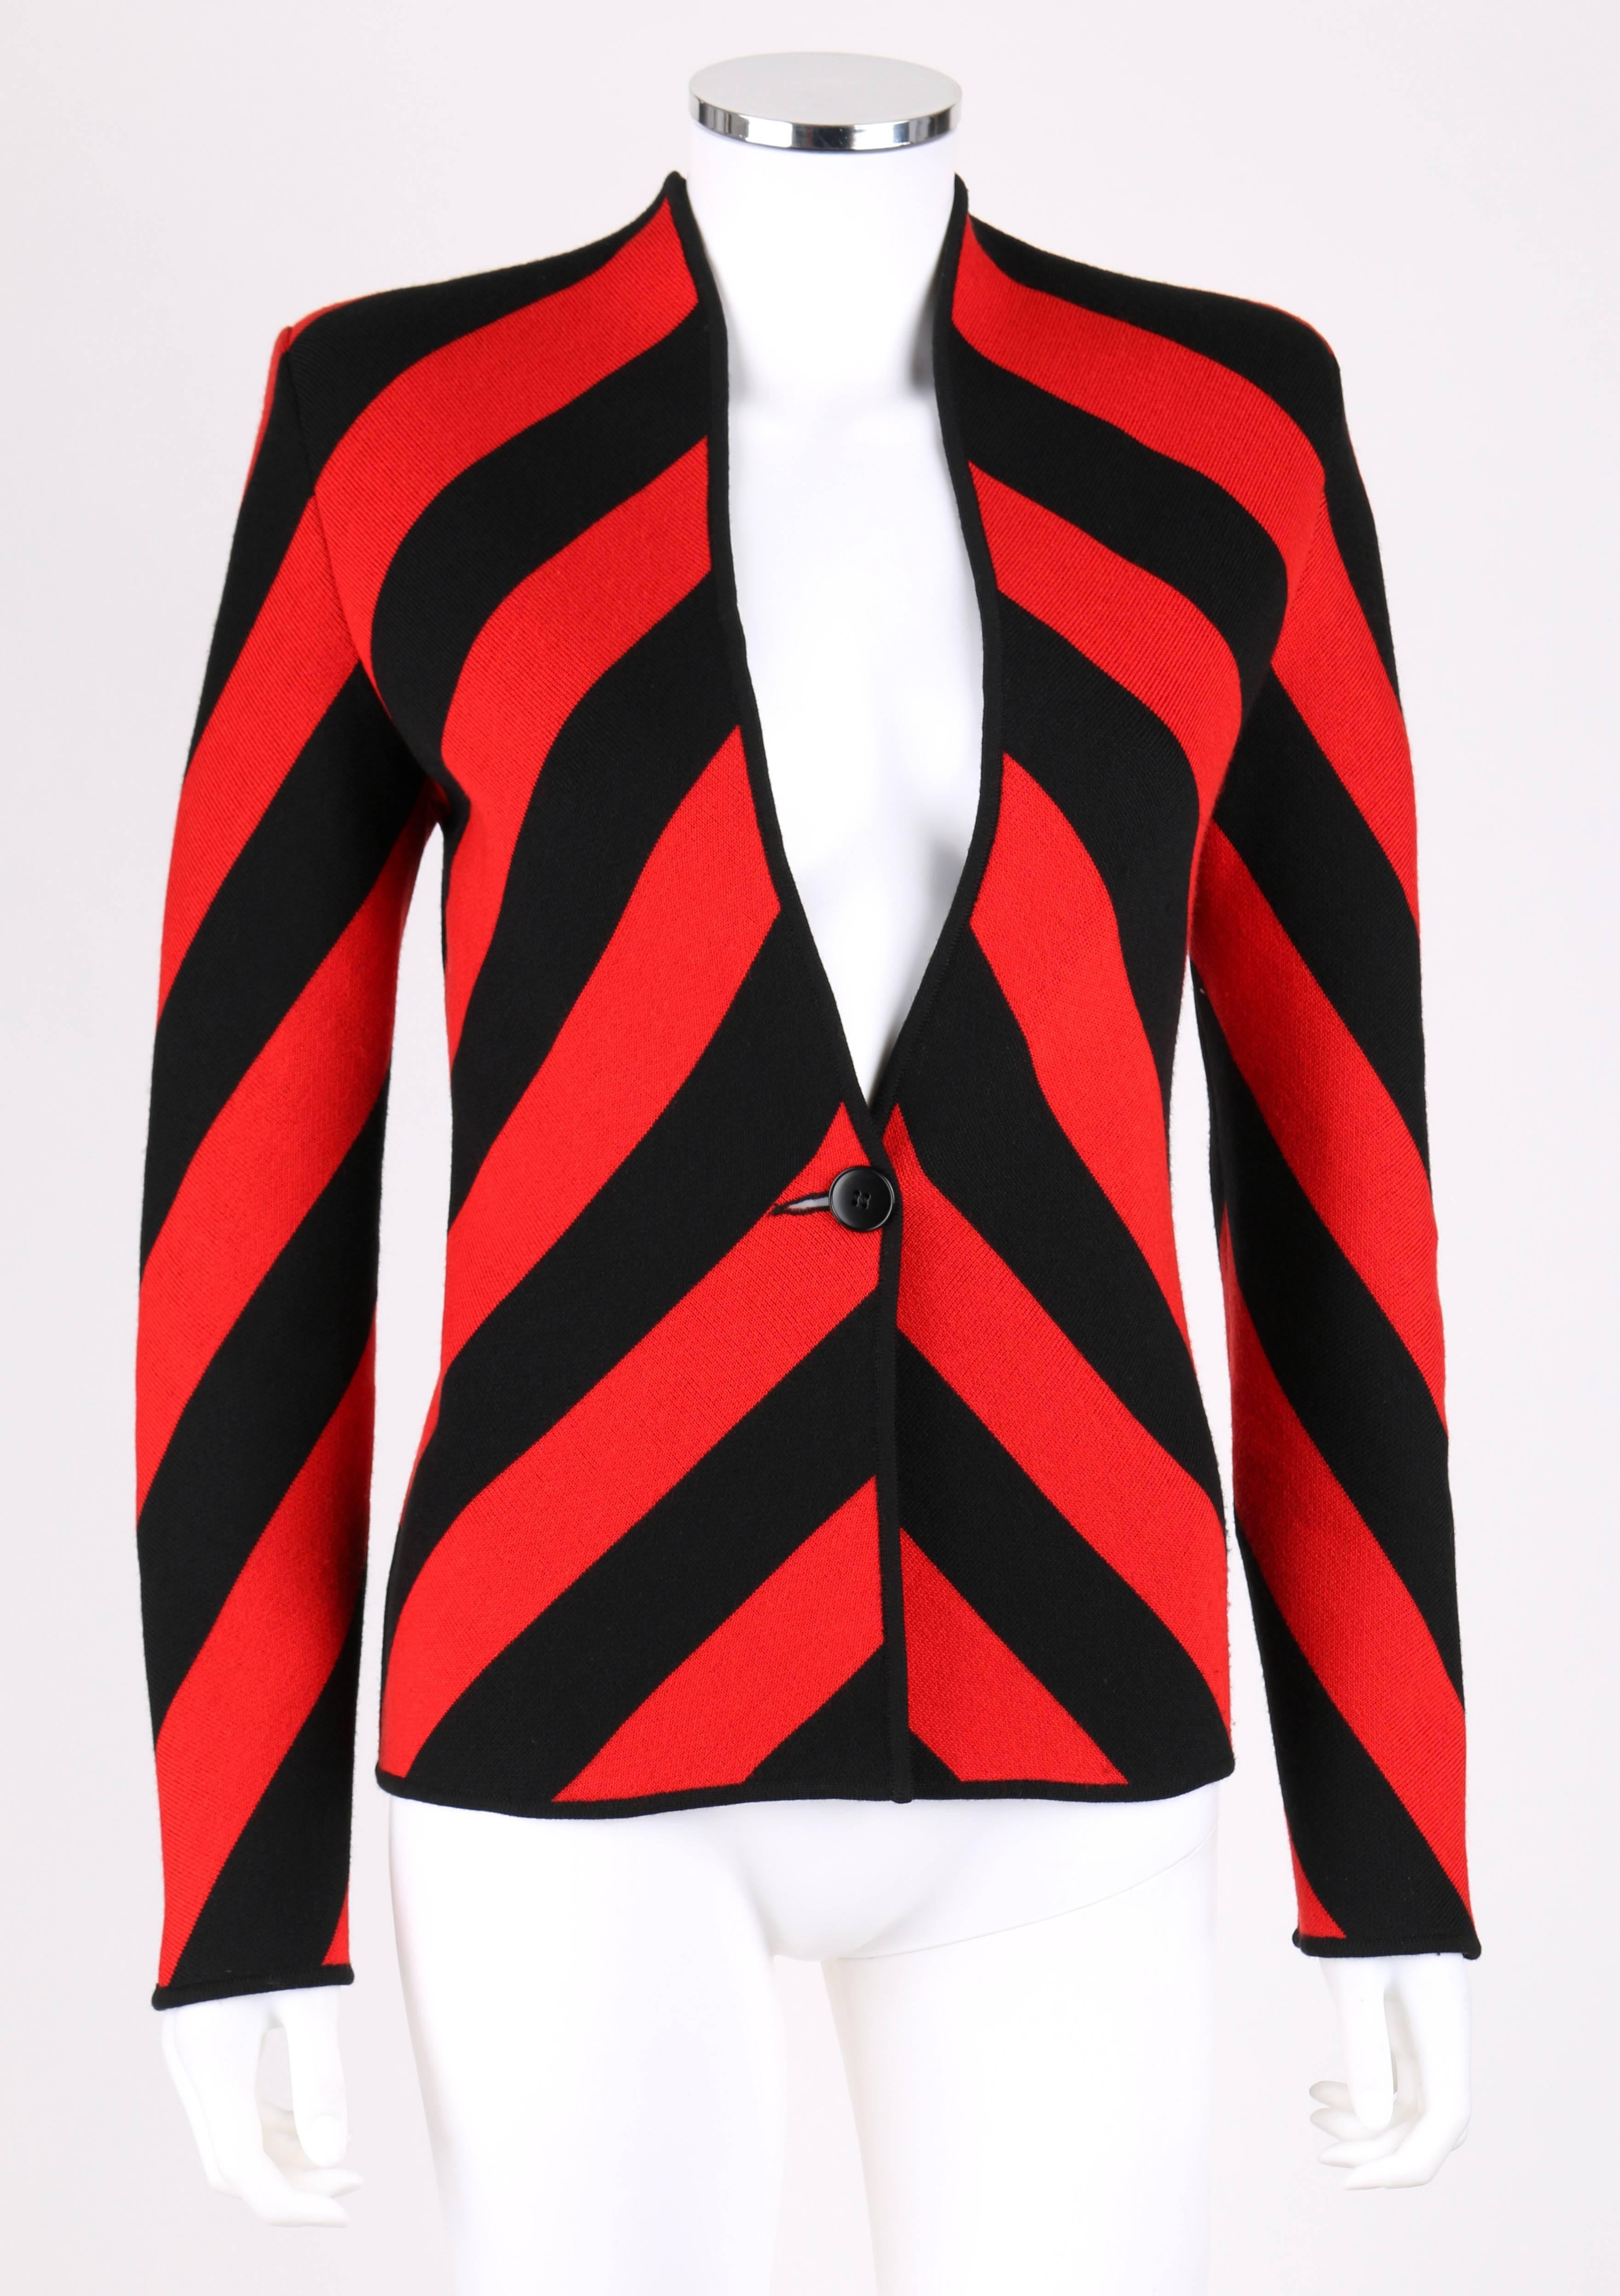 Givenchy Couture c.1990's designed by Alexander McQueen black red diagonal stripe wool blazer. Long sleeves. Single center front button closure. Mock collar. V-neckline. Thin rib knit trimming at cuffs, collar, and hemline. Unlined. Shoulder pads.